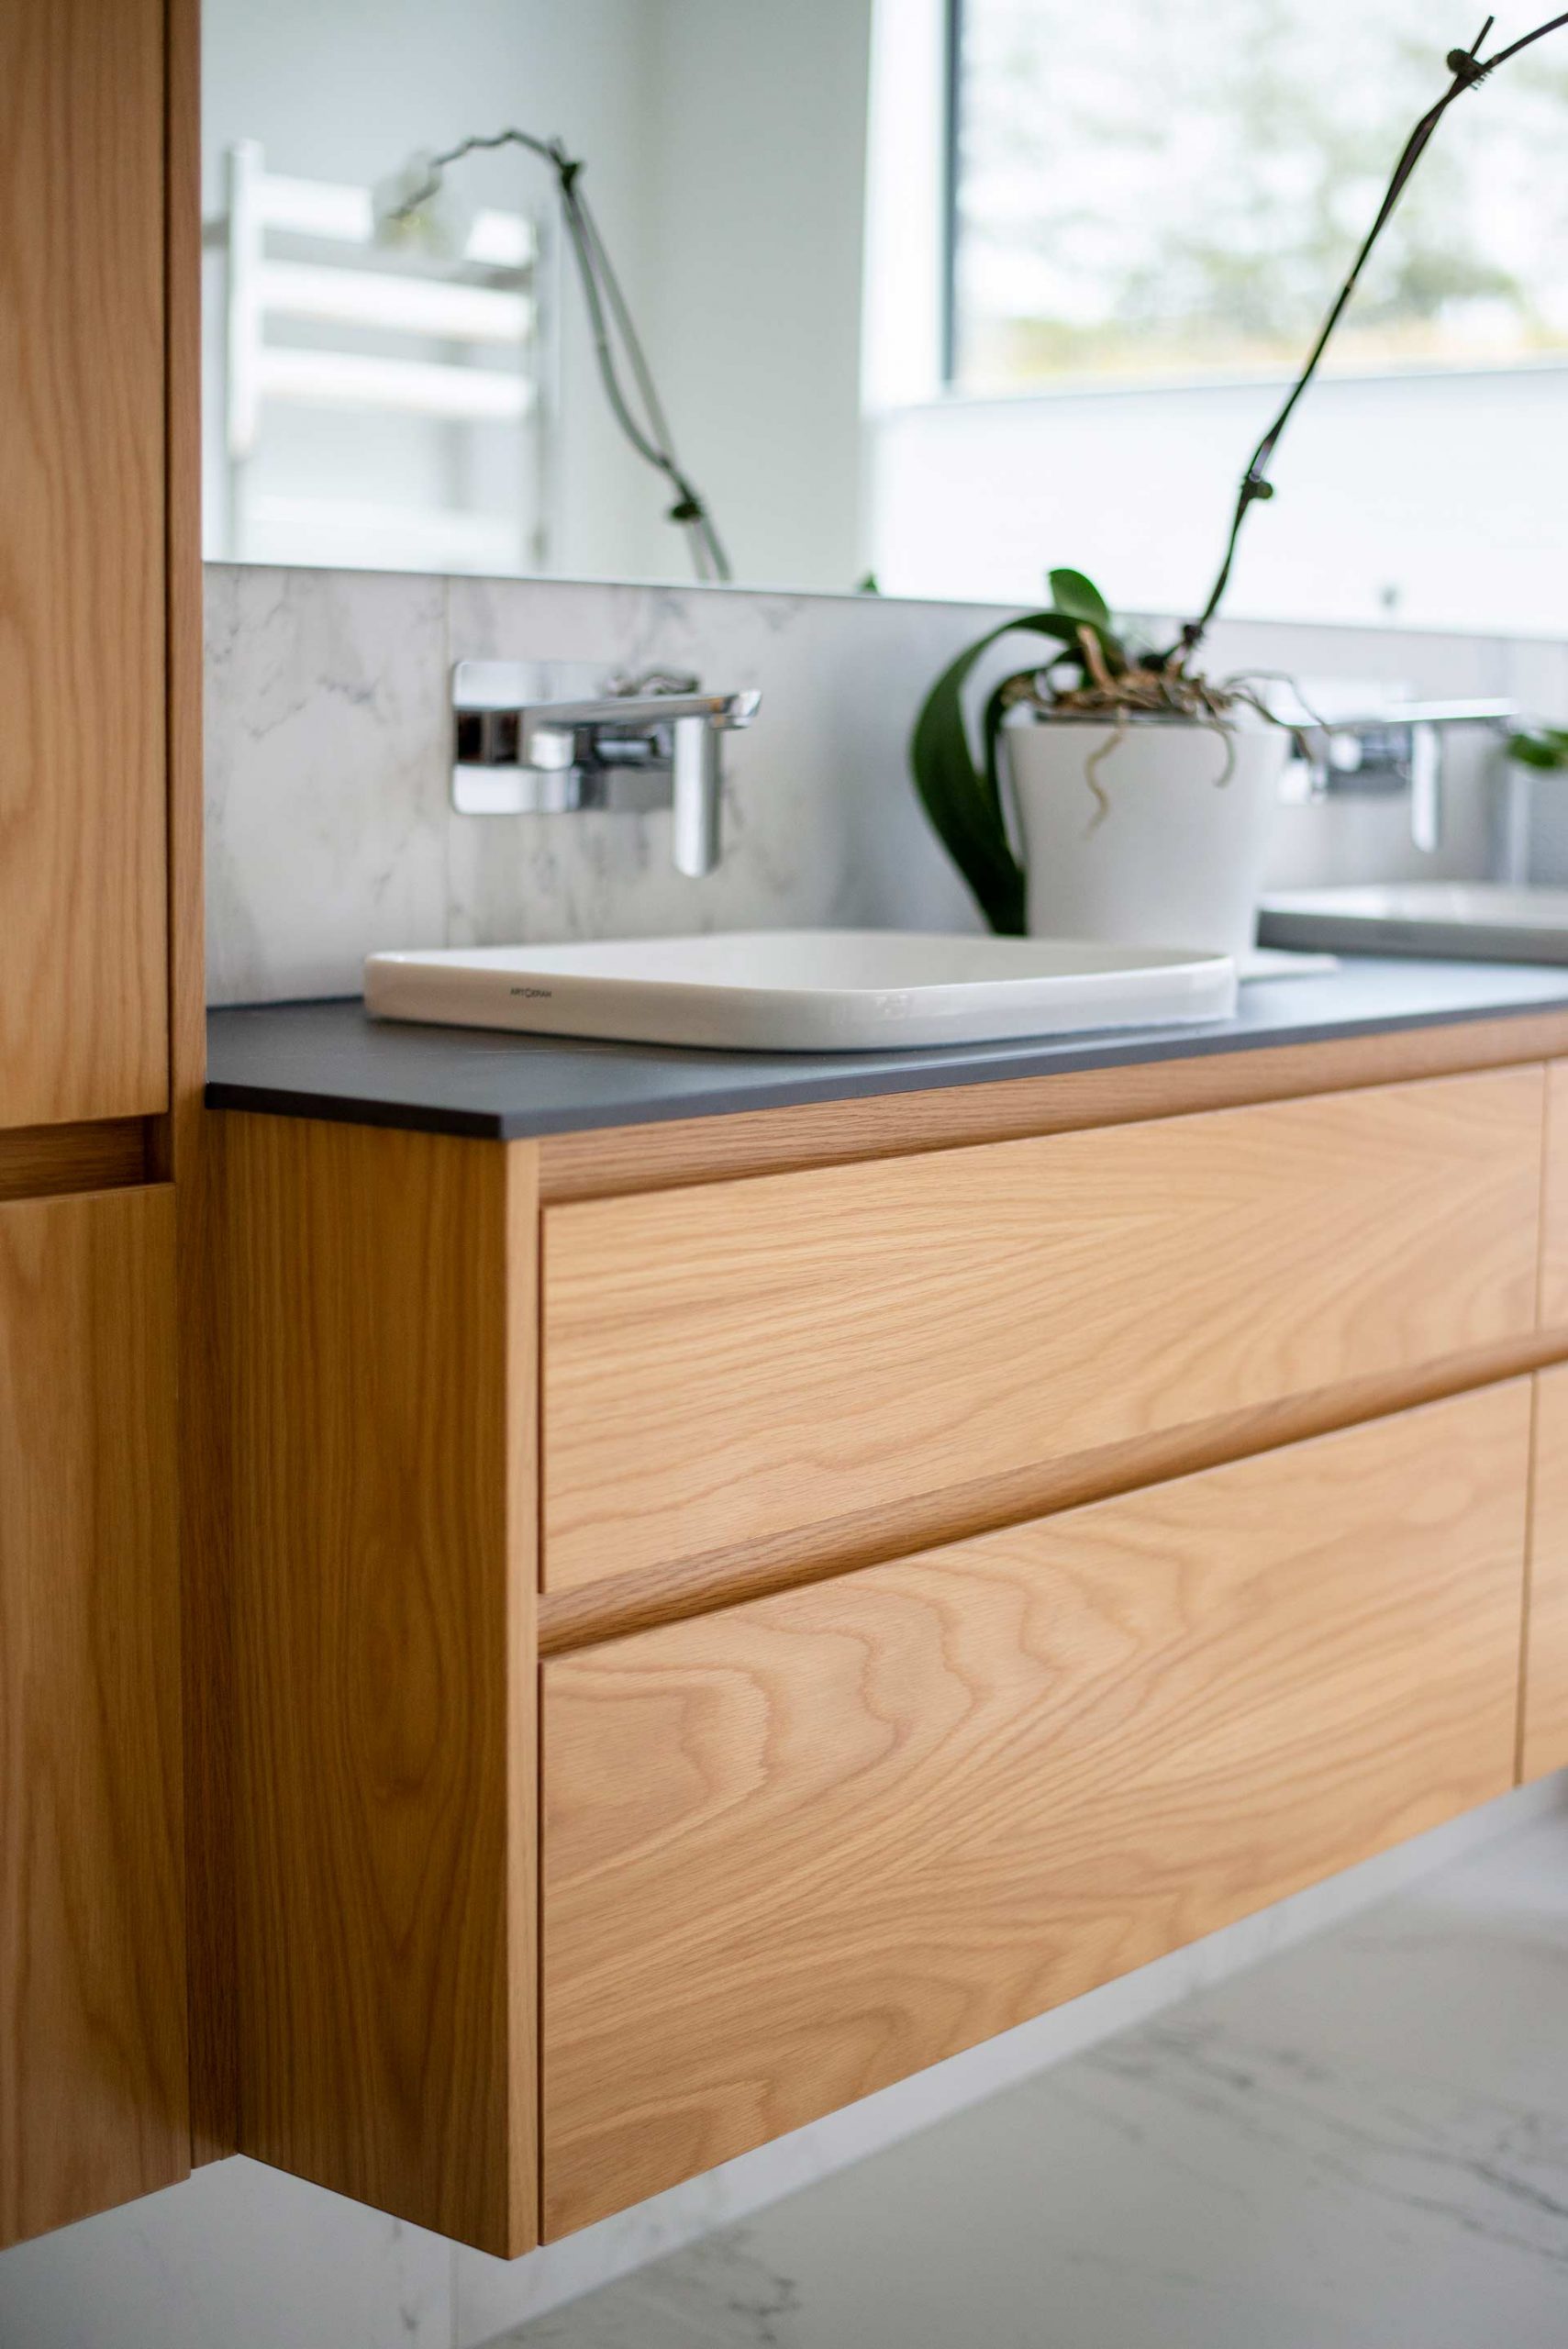 Kitchens-By-John-Prosser-Auckland-Bathrooms-Renovation-Wooden-Drawers